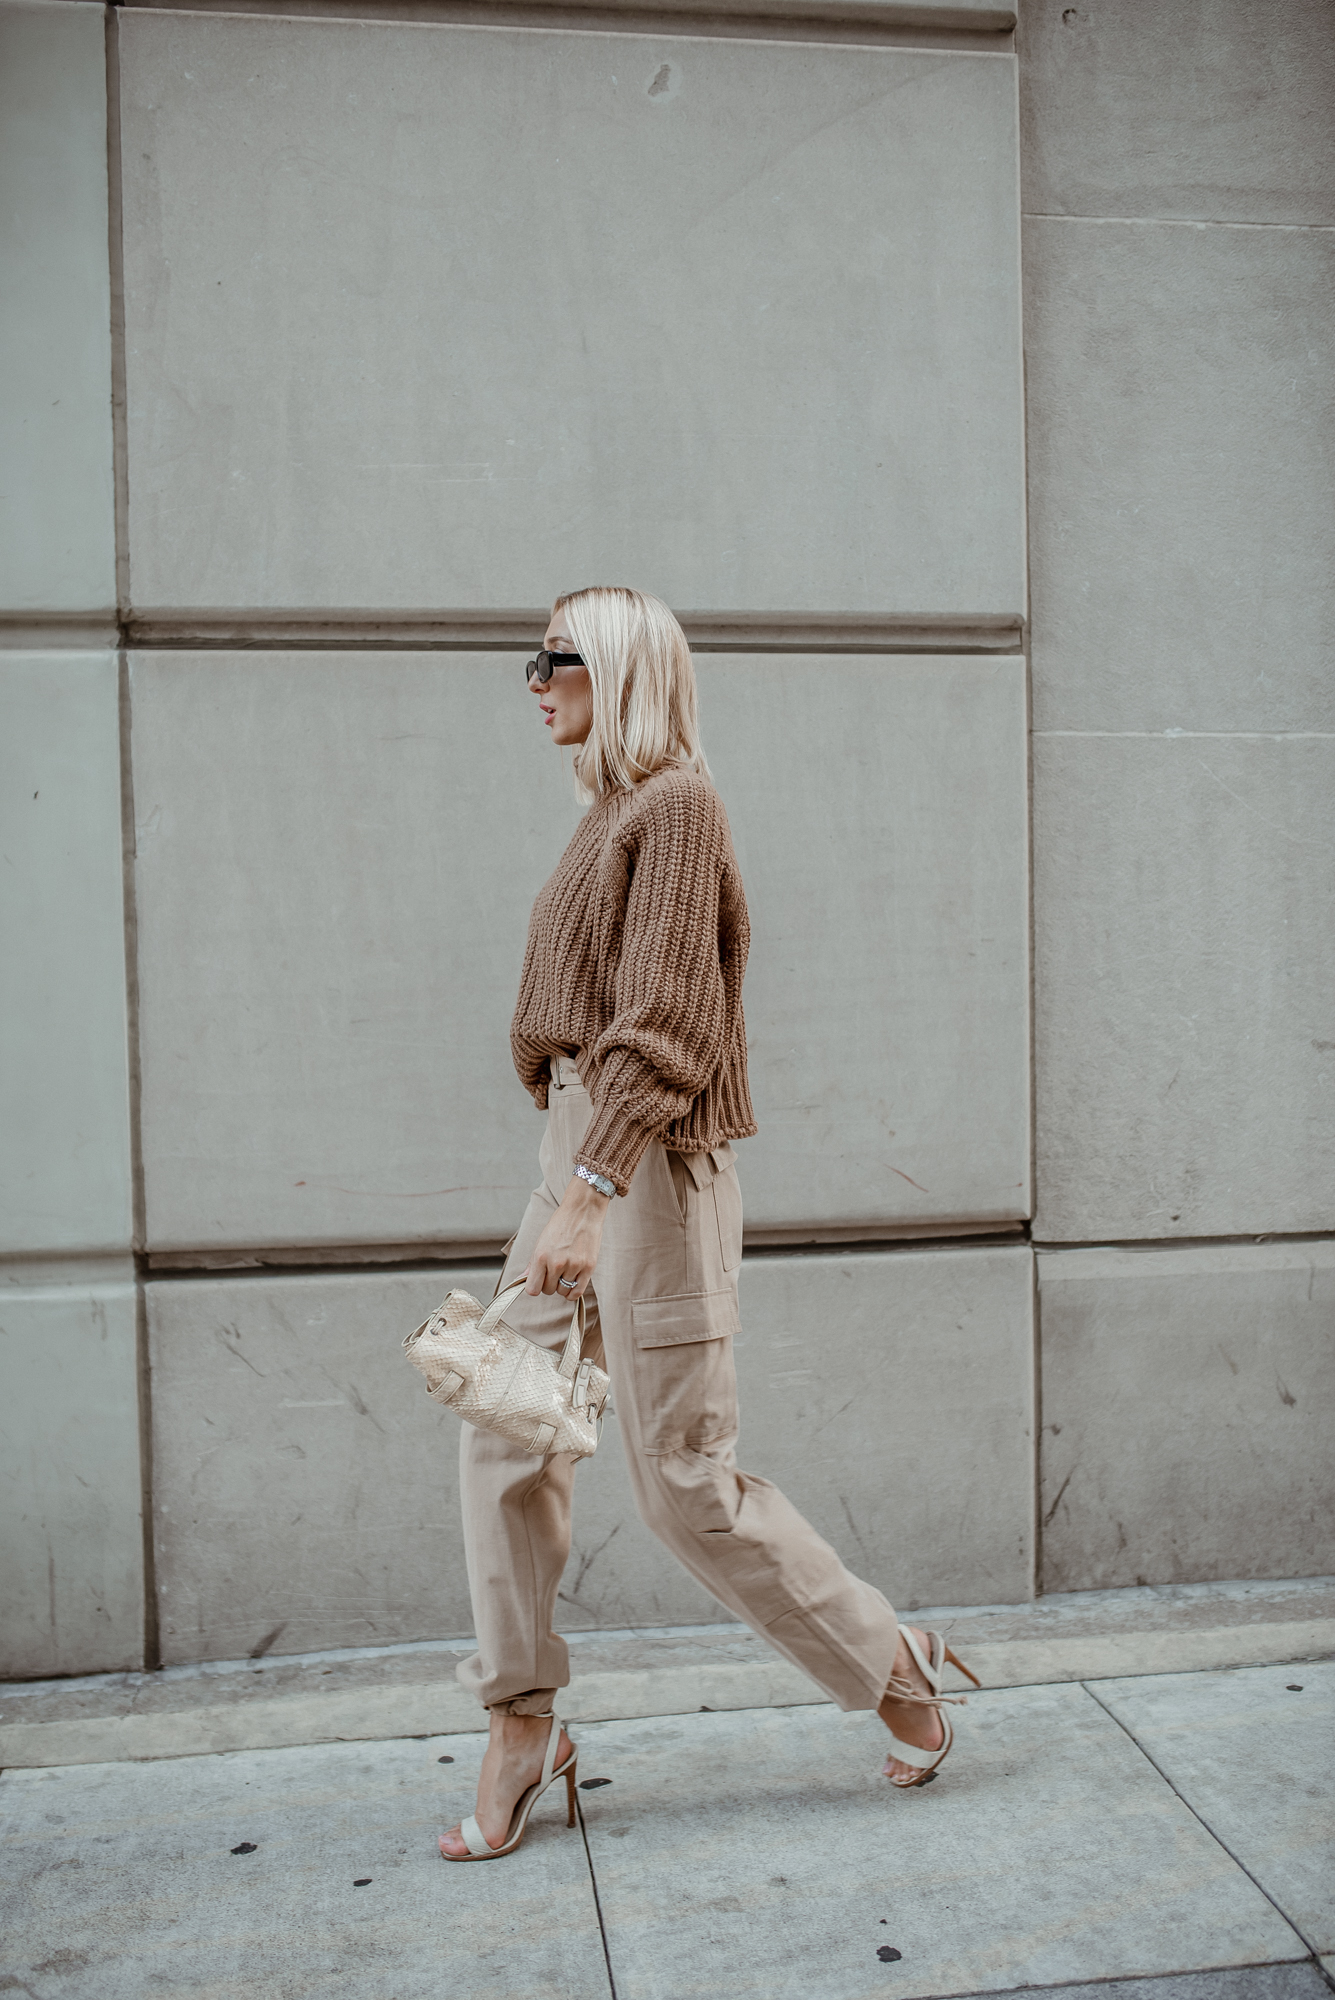 Autumn/ fall outfit 2019  Brown pants outfit, Cargo pants women